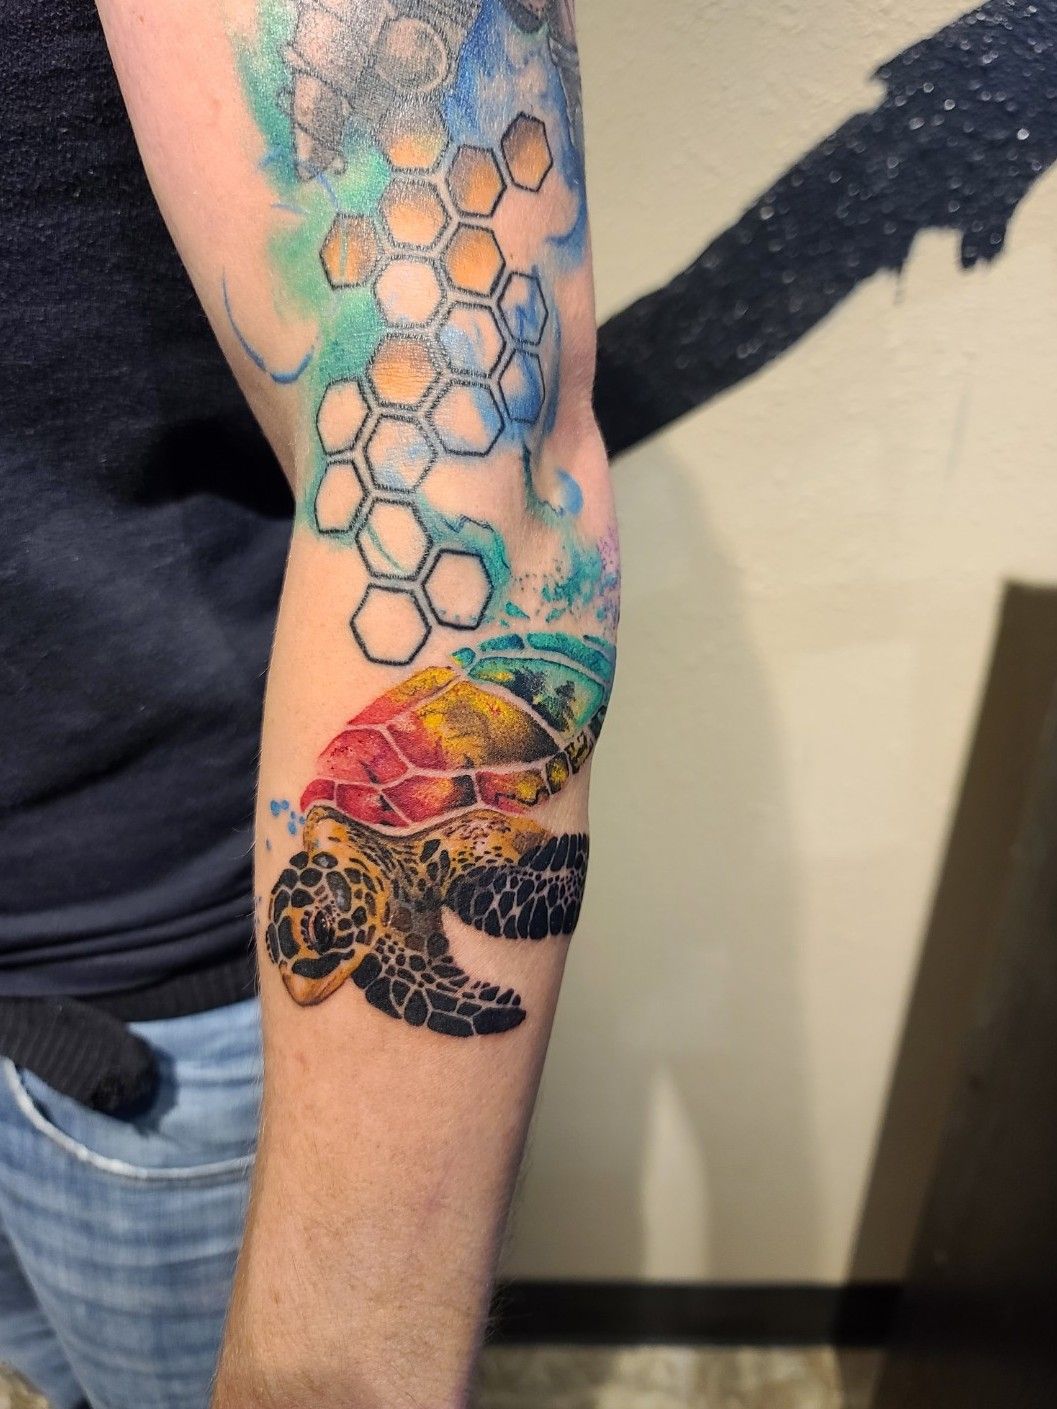 Los Angeles Tattoo Gye  Turtle tattoo black and grey one more session to  finish full sleeve Full sleeve tattoo turtle turtletattoo  fullsleevetattoo guayaquil ecuador  Facebook